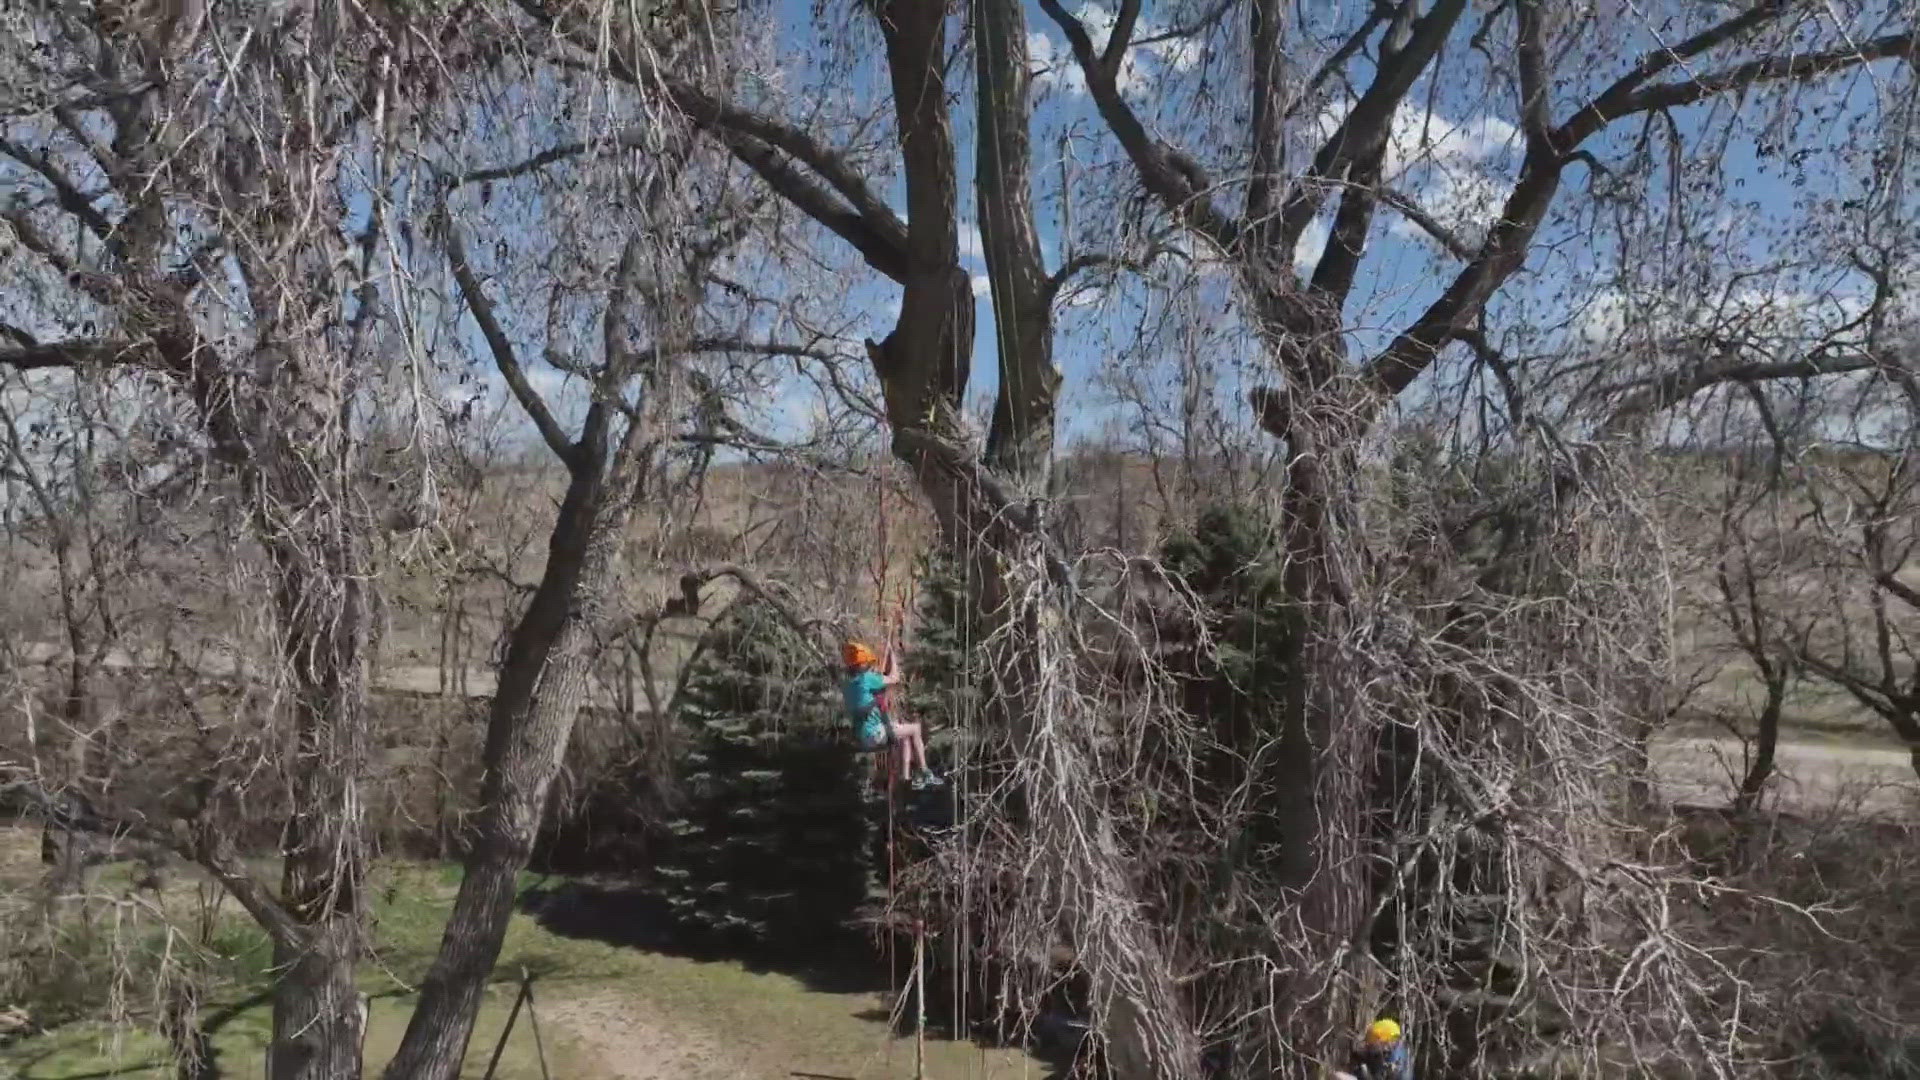 Tree Climbing Colorado is reportedly one of the few recreational tree-climbing companies in the country.